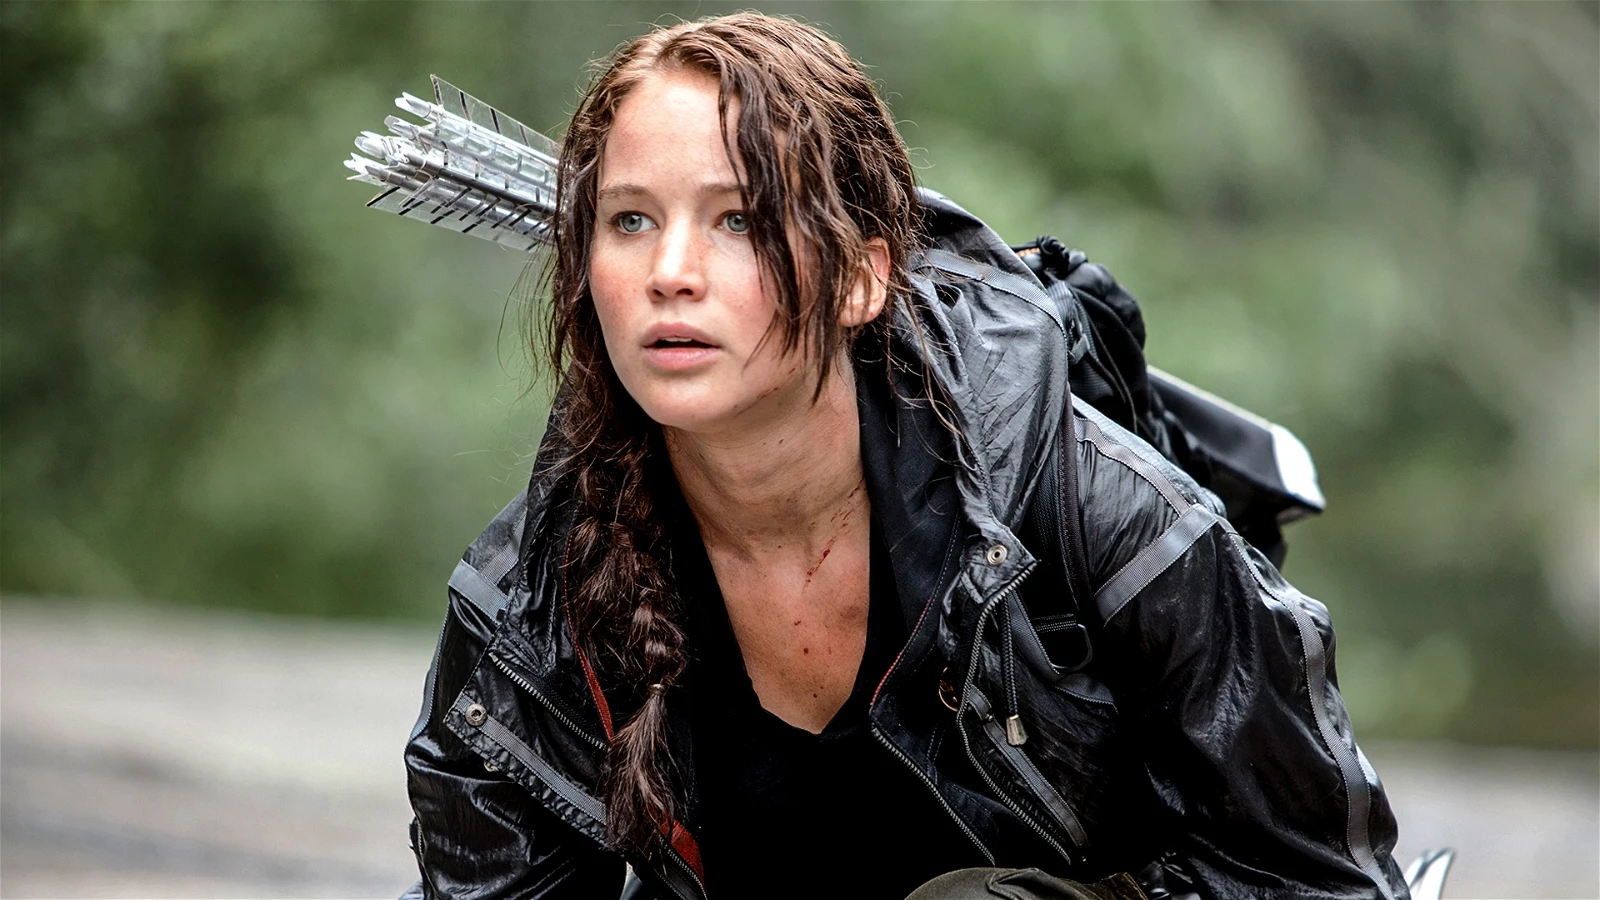 Jennifer Lawrence got famous for her role as Katniss Everdeen in The Hunger Games franchise.